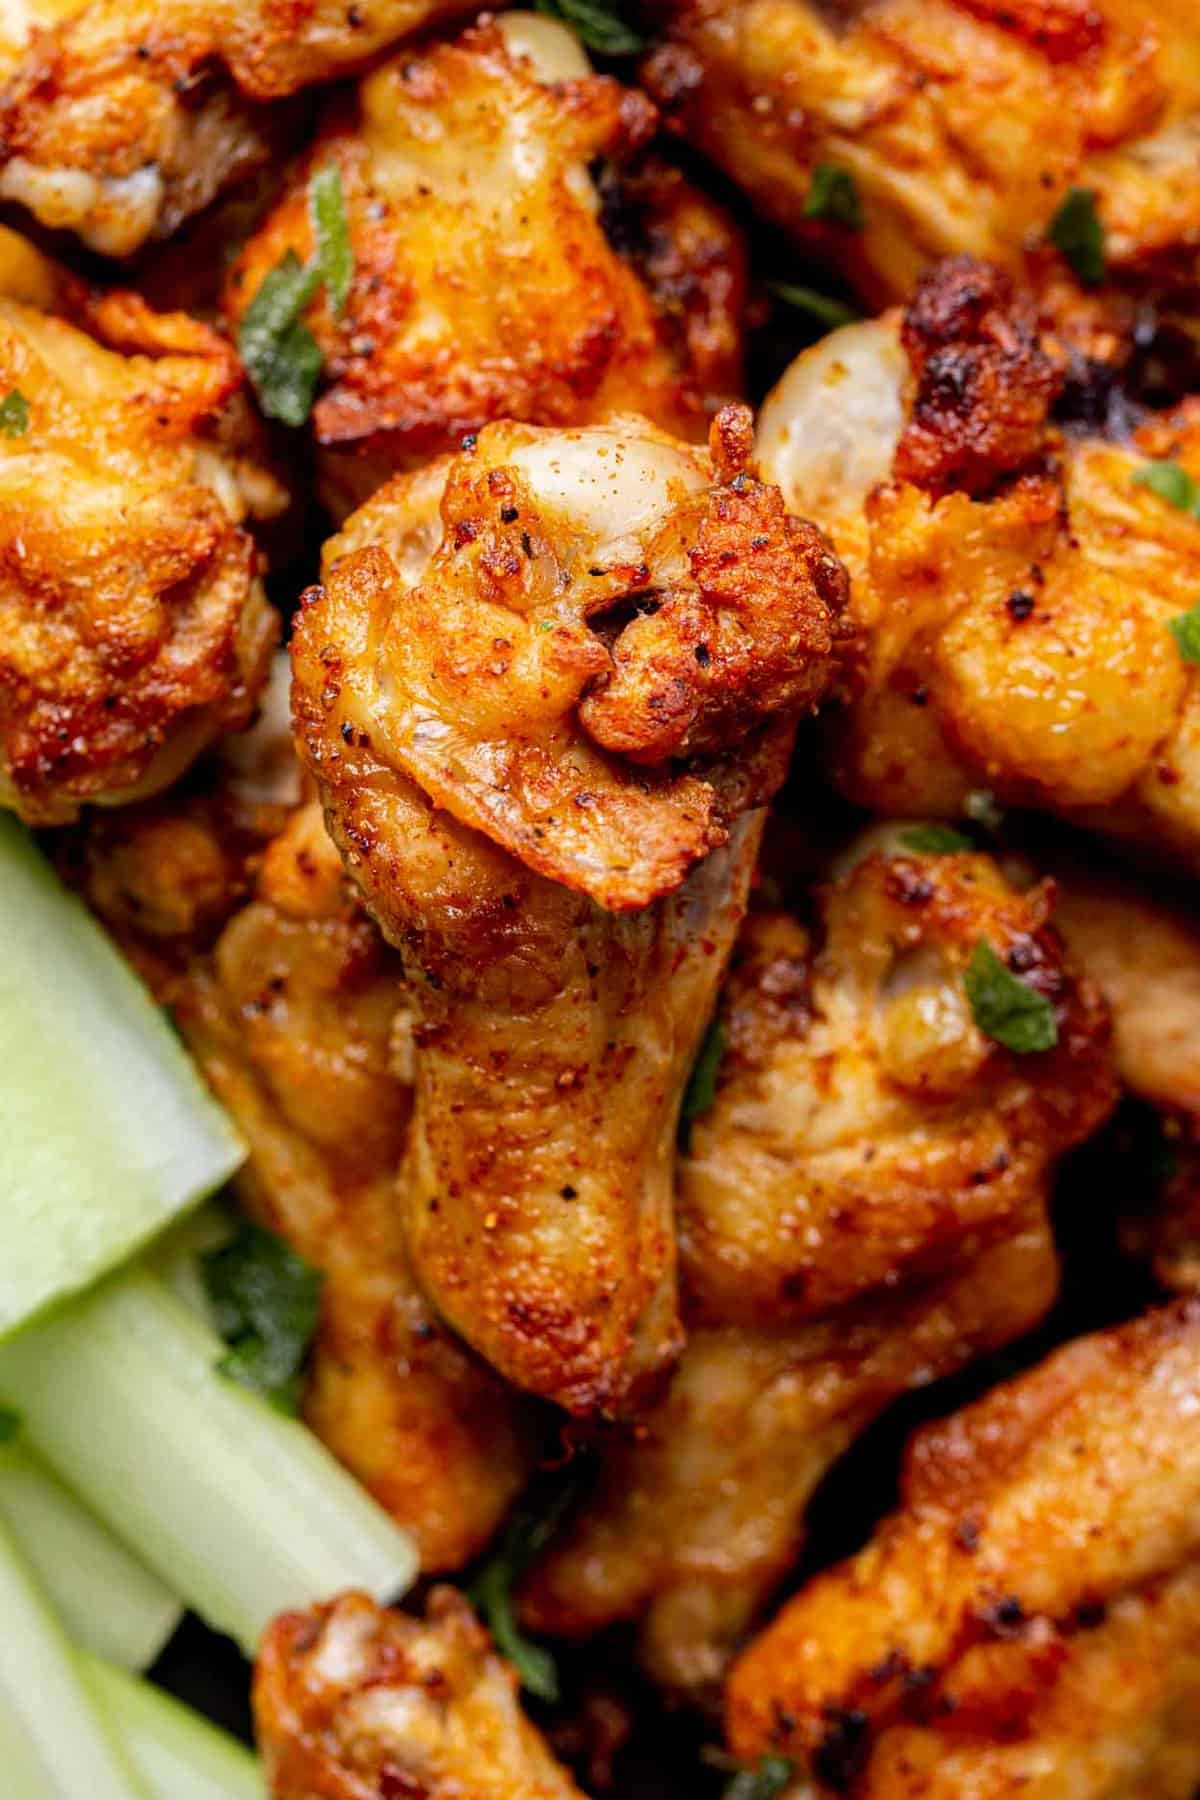 A pile of chicken wings with celery.